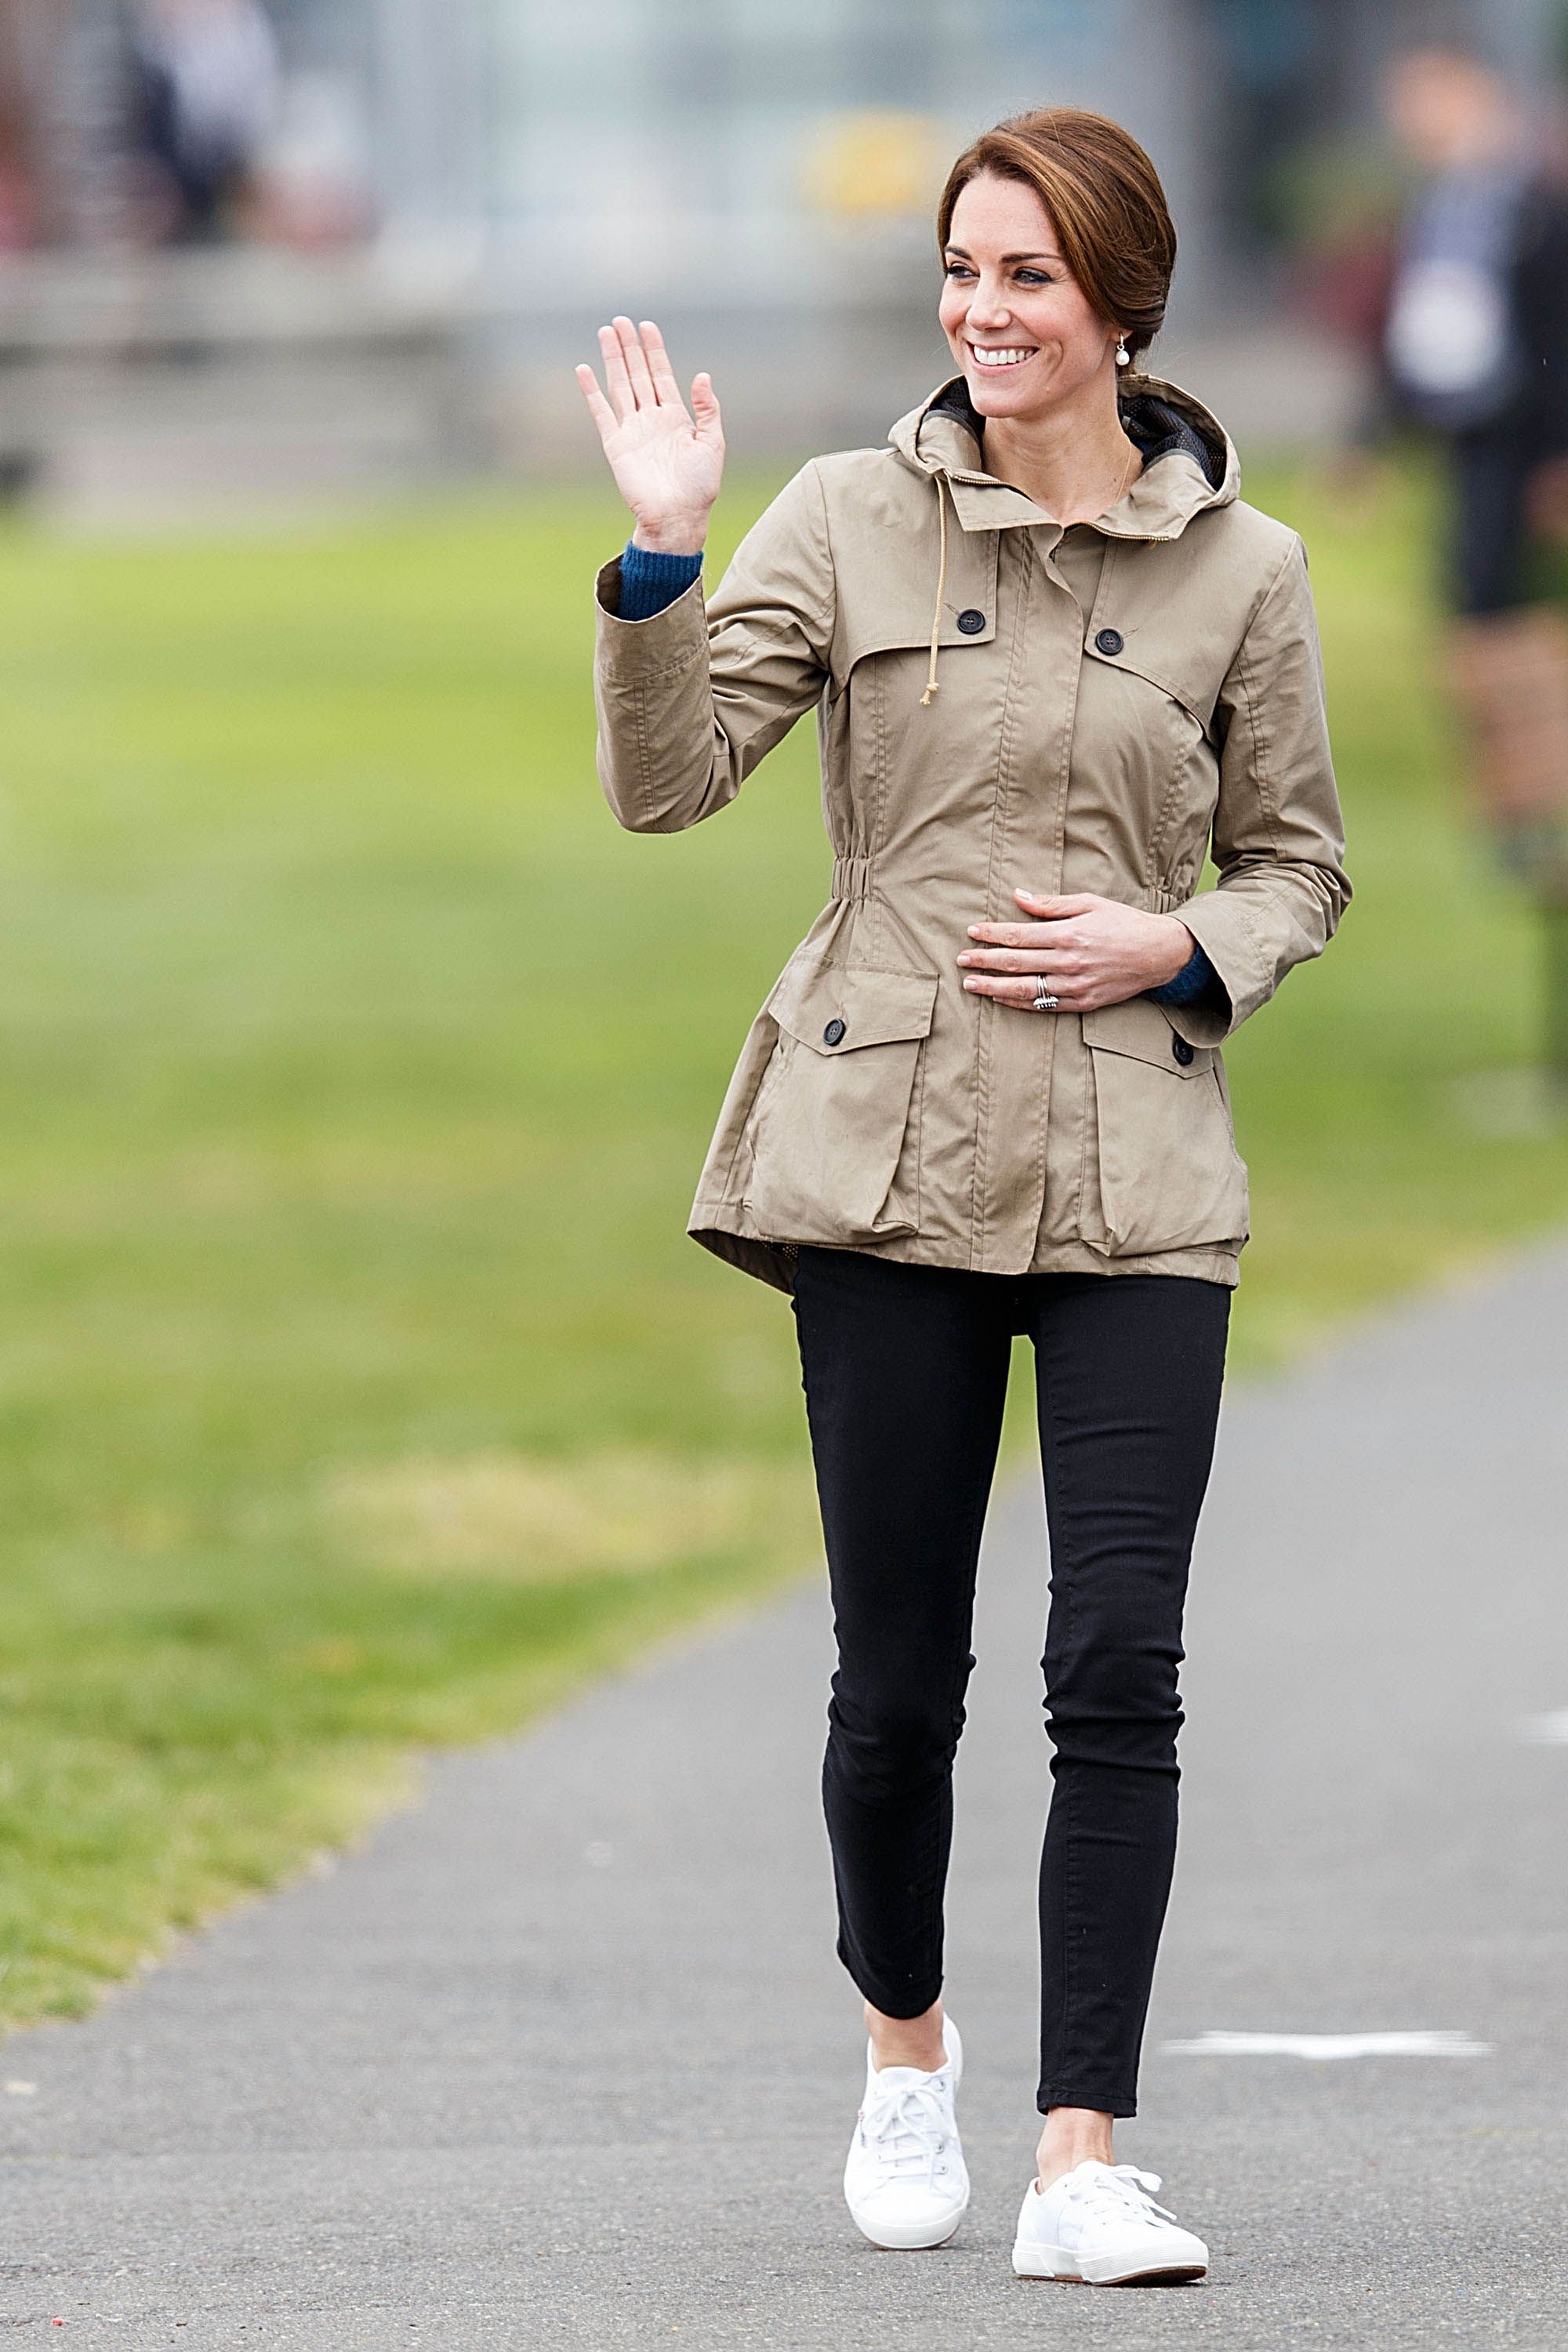 Kate Middleton casual style: The 